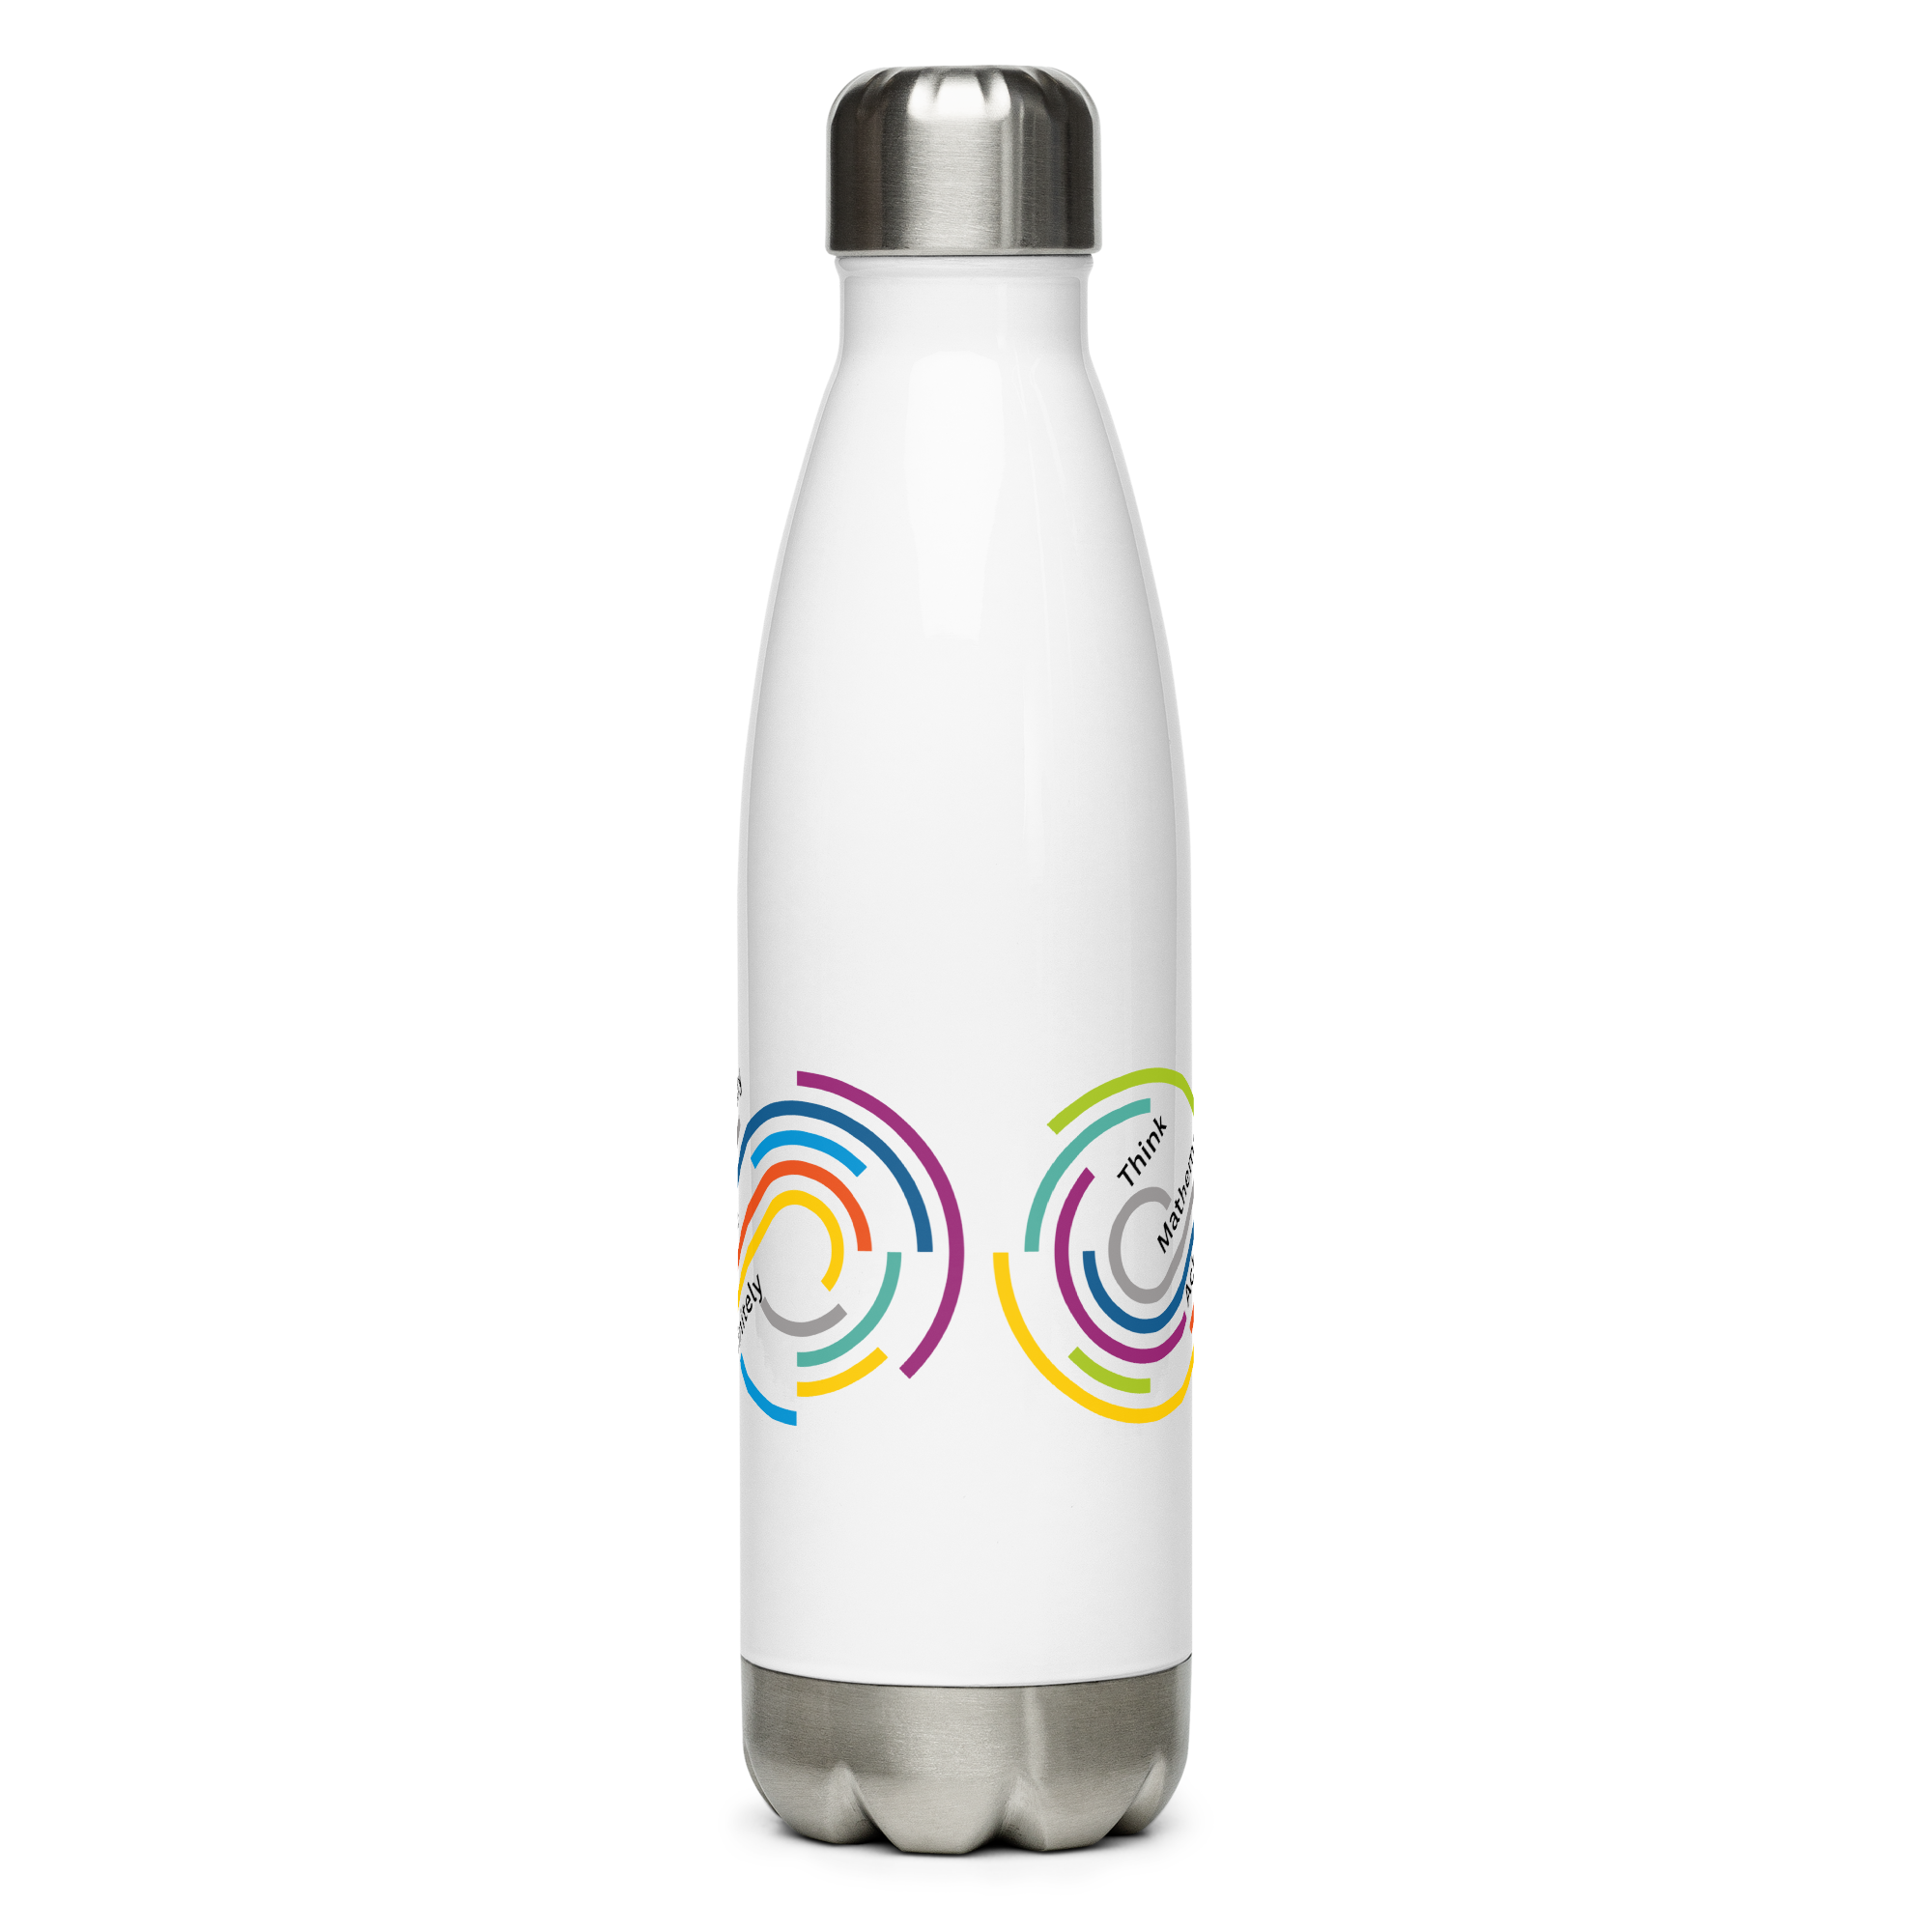 Think Mathematically Achieve Infinitely - Stainless Steel Water Bottle